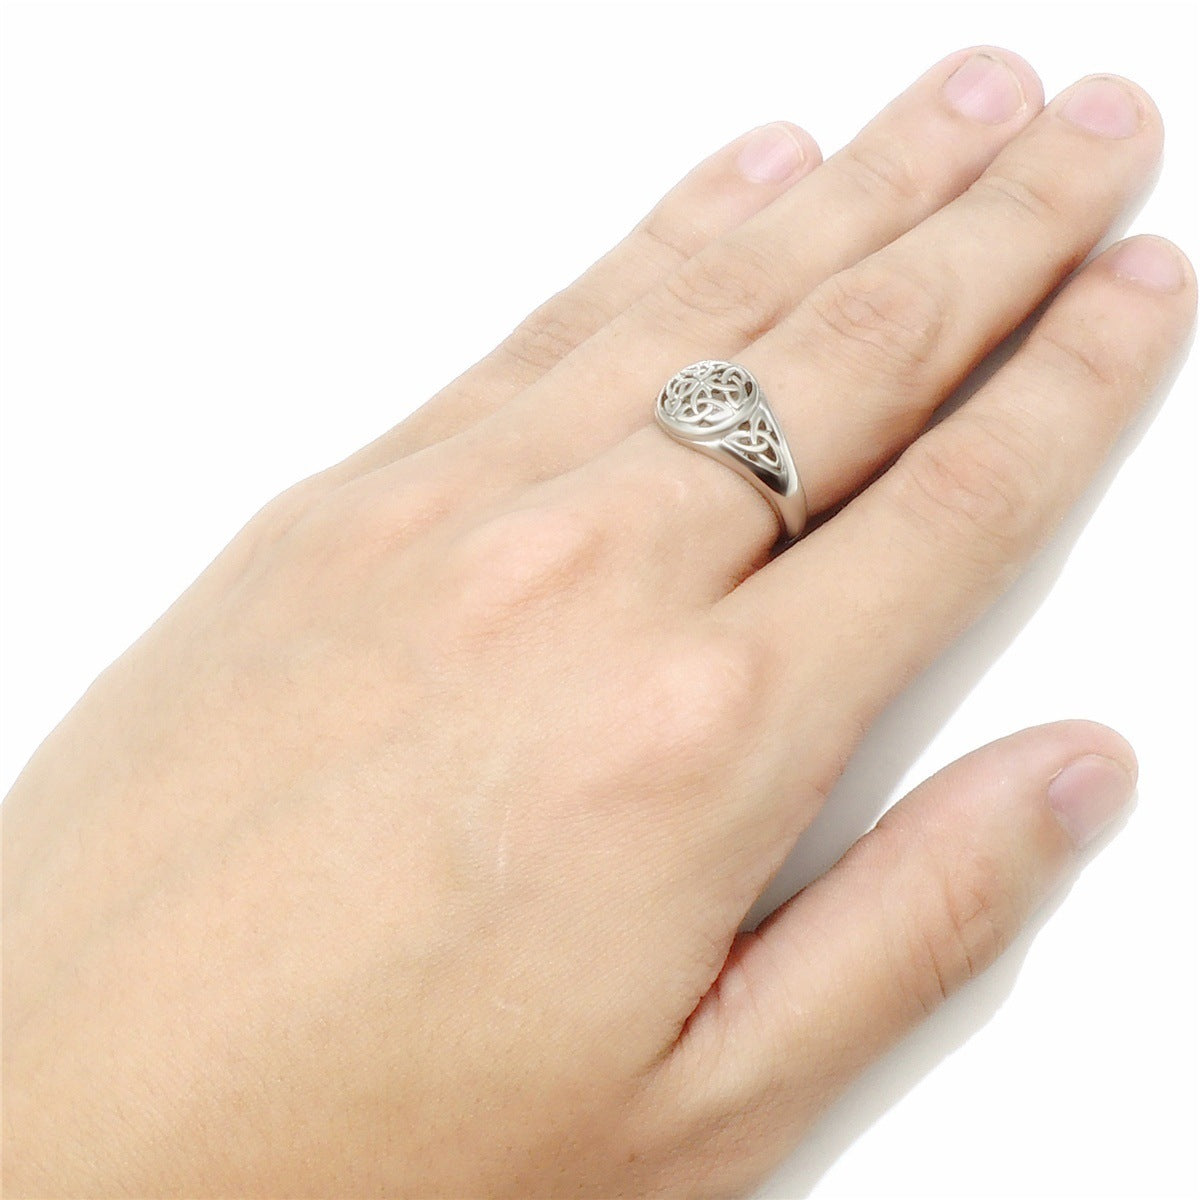 Eternal Love: Sextuple Triquetra Protection Ring